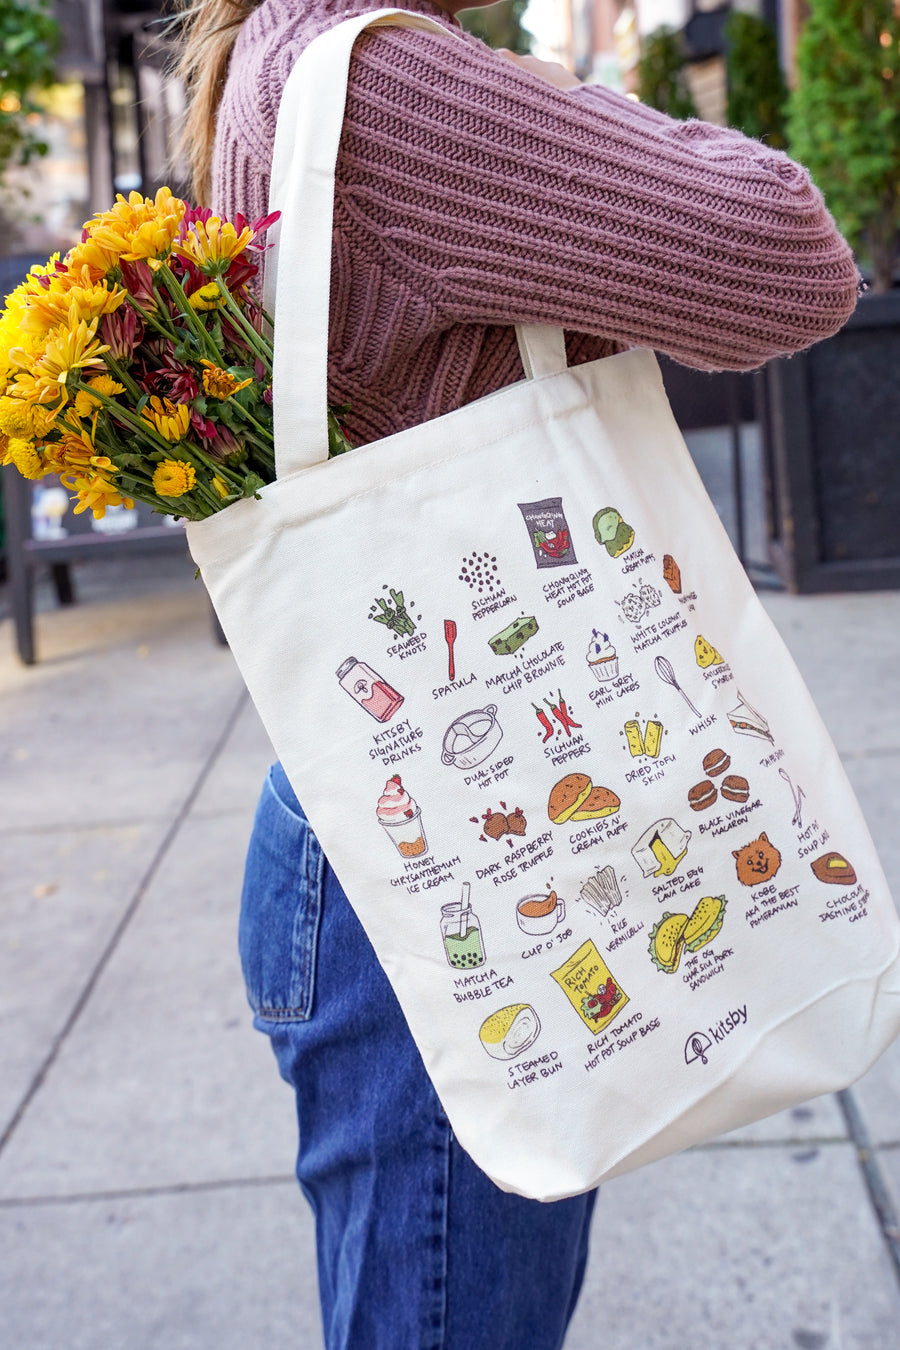 Kitsby Tote Bags